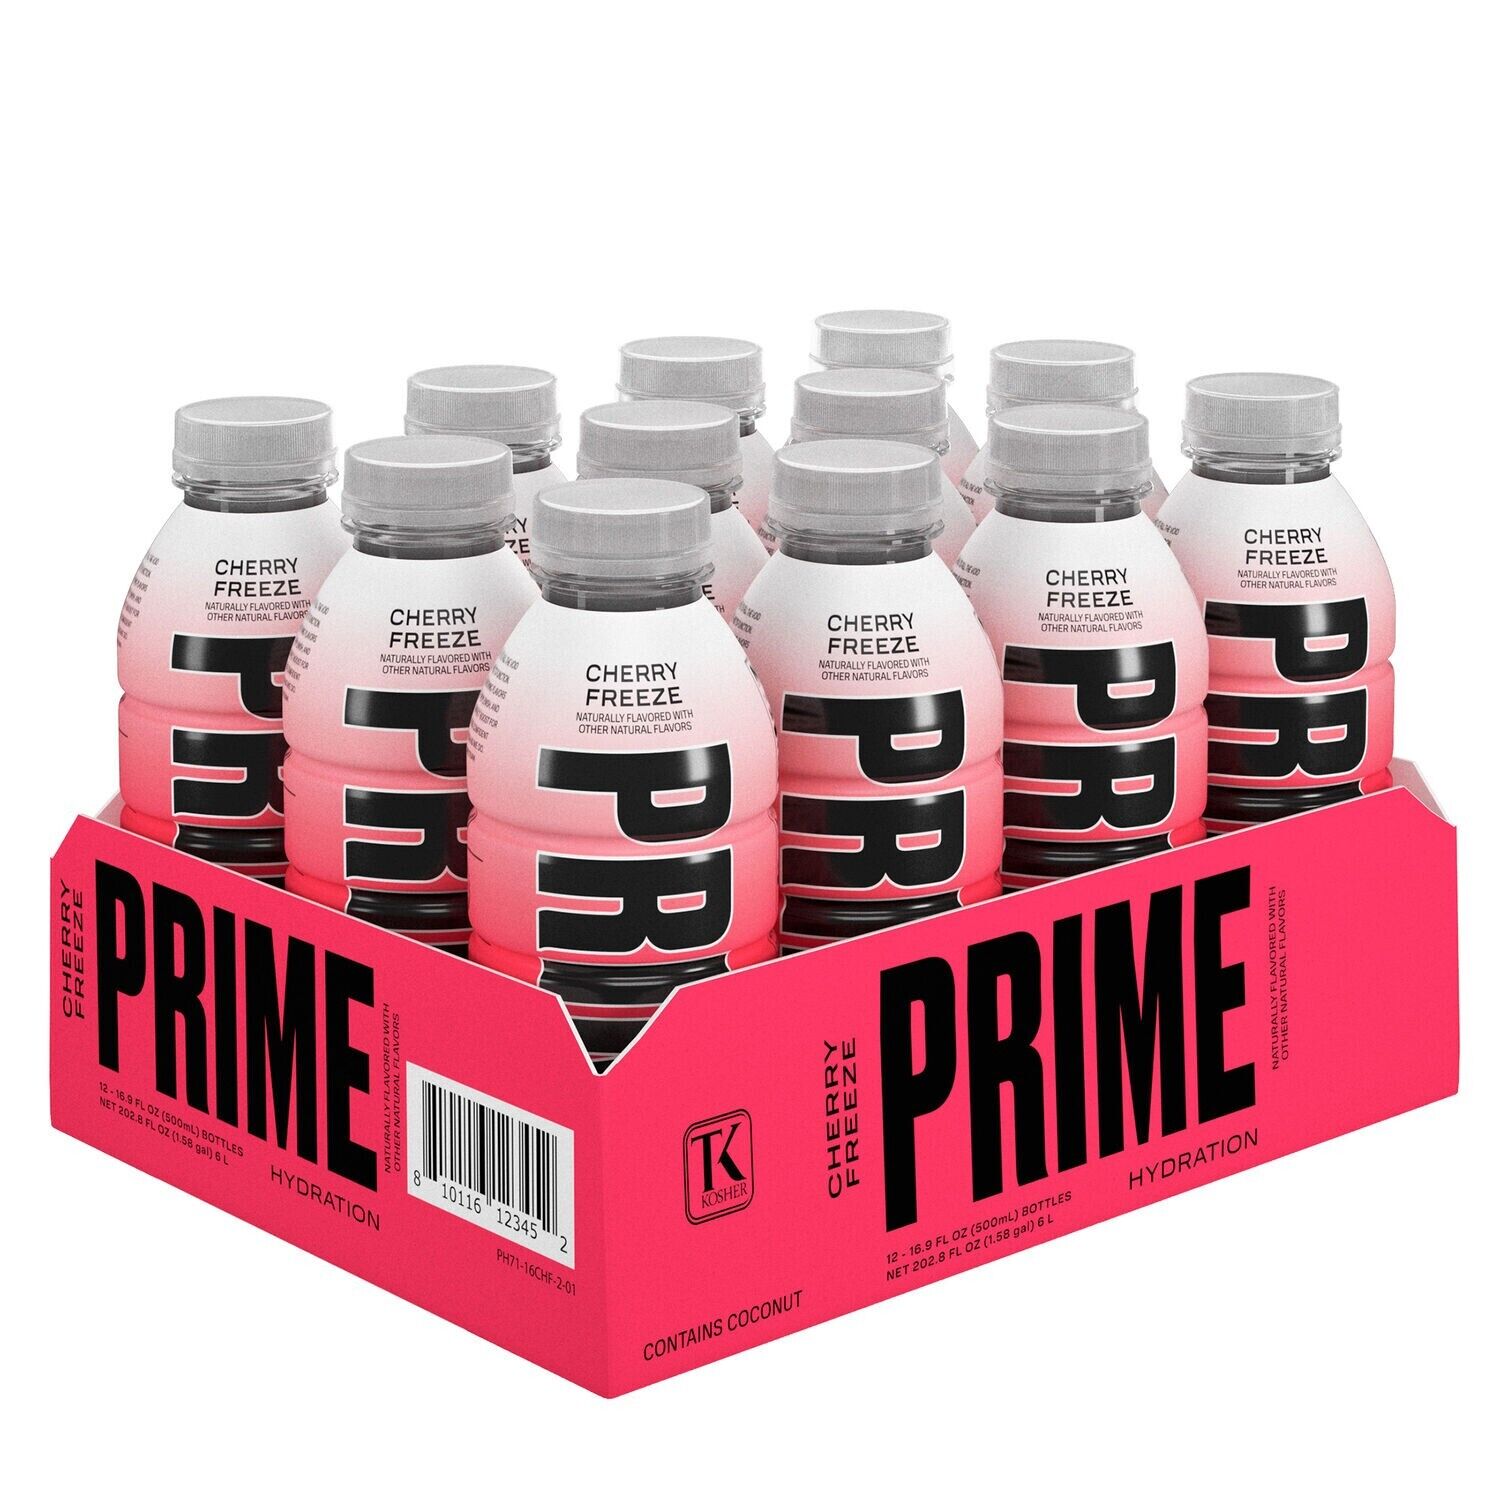 *NEW* PRIME Hydration Cherry Freeze One Case (12 Bottles) LIMITED